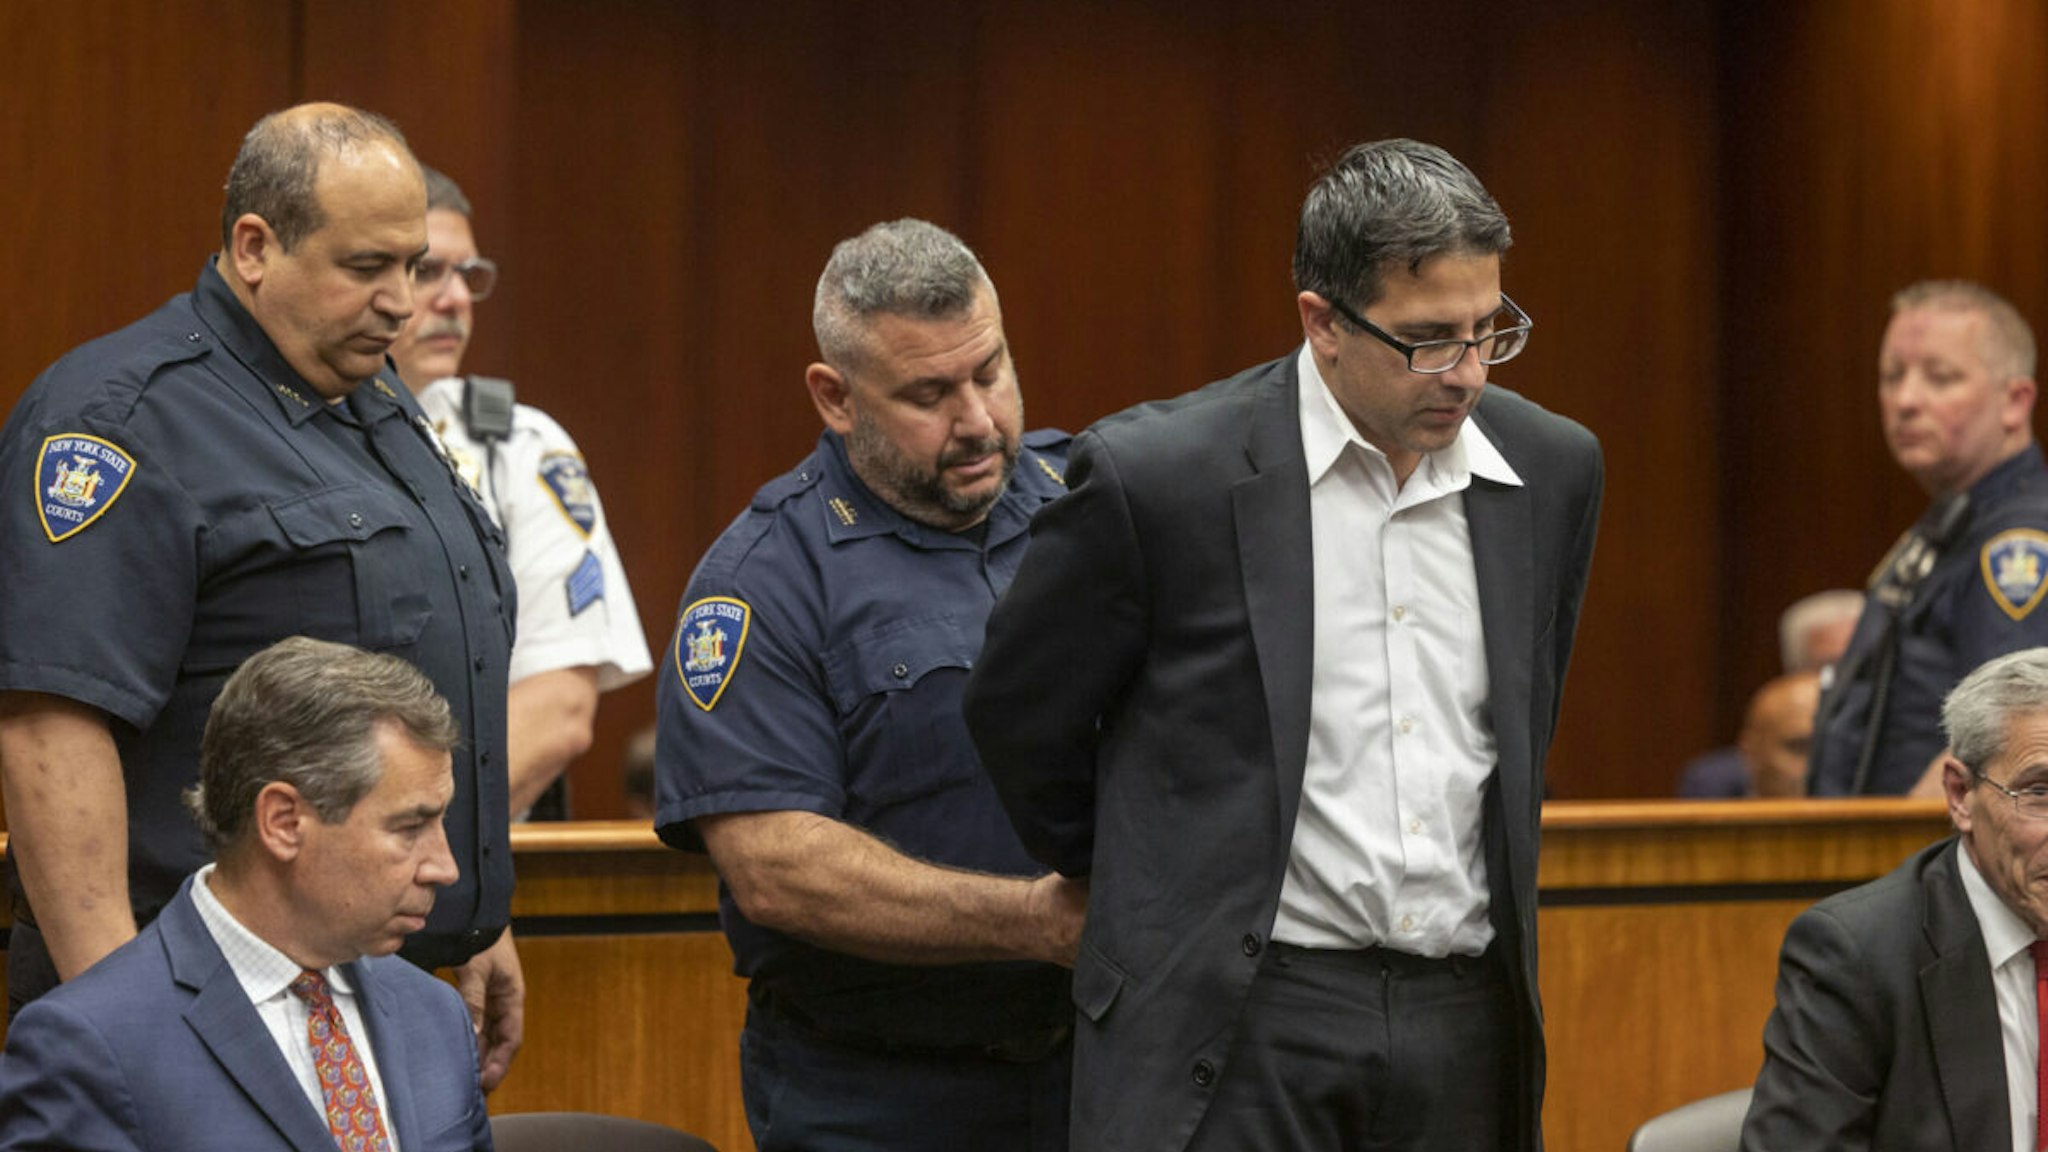 Former NYPD officer Michael Valva is handcuffed after the guilty verdict was read during his trial at Suffolk Criminal Court in Riverhead, New York on November 4, 2022.